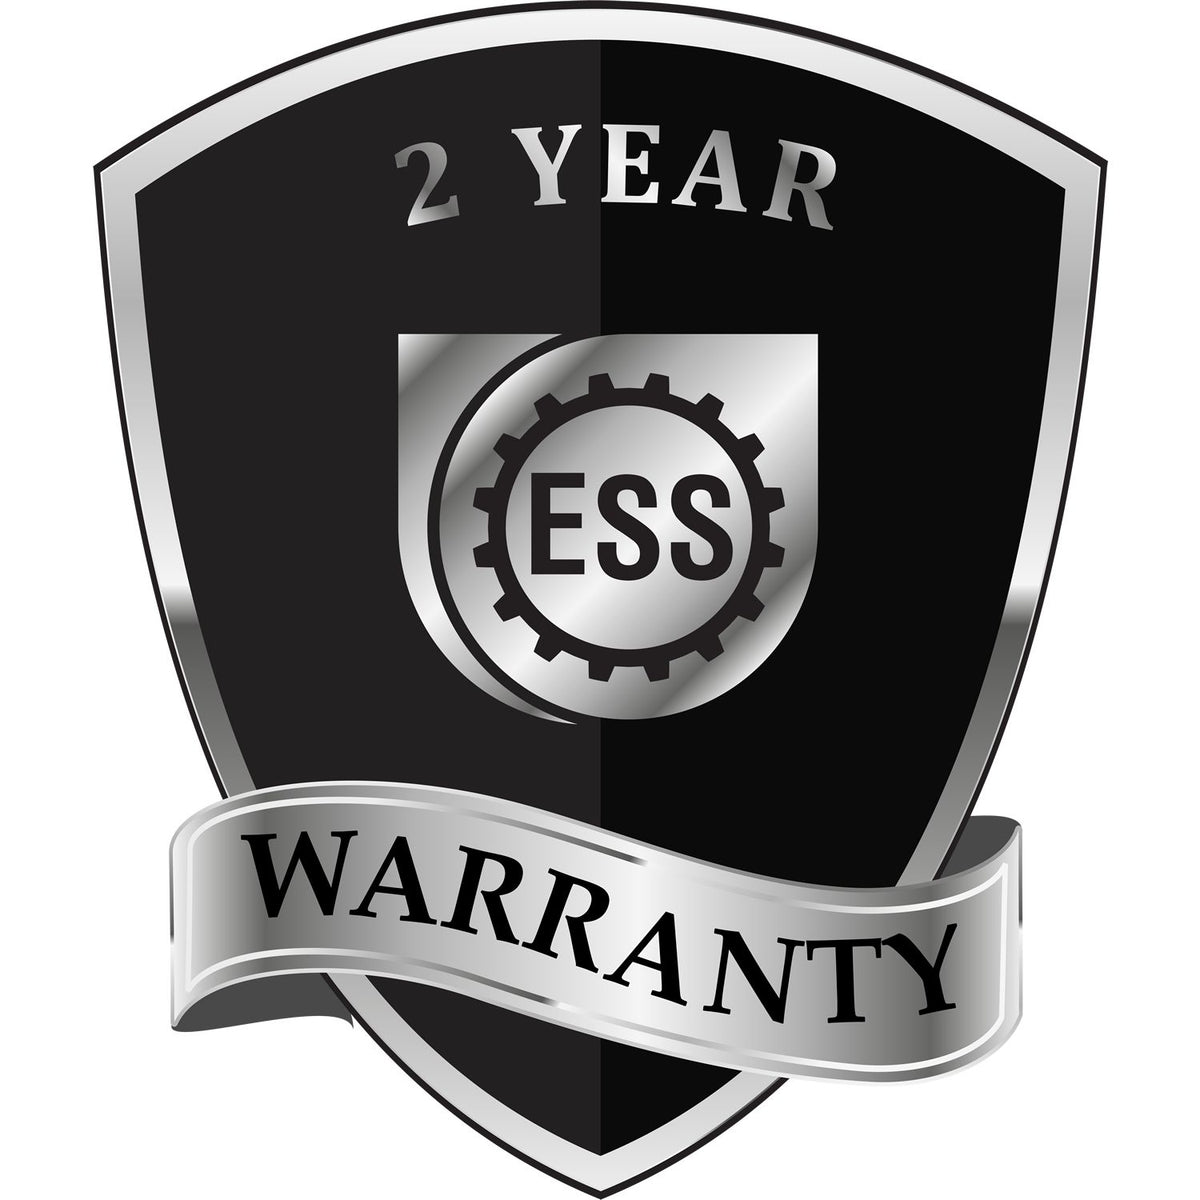 A black and silver badge or emblem showing warranty information for the Hybrid Indiana Landscape Architect Seal